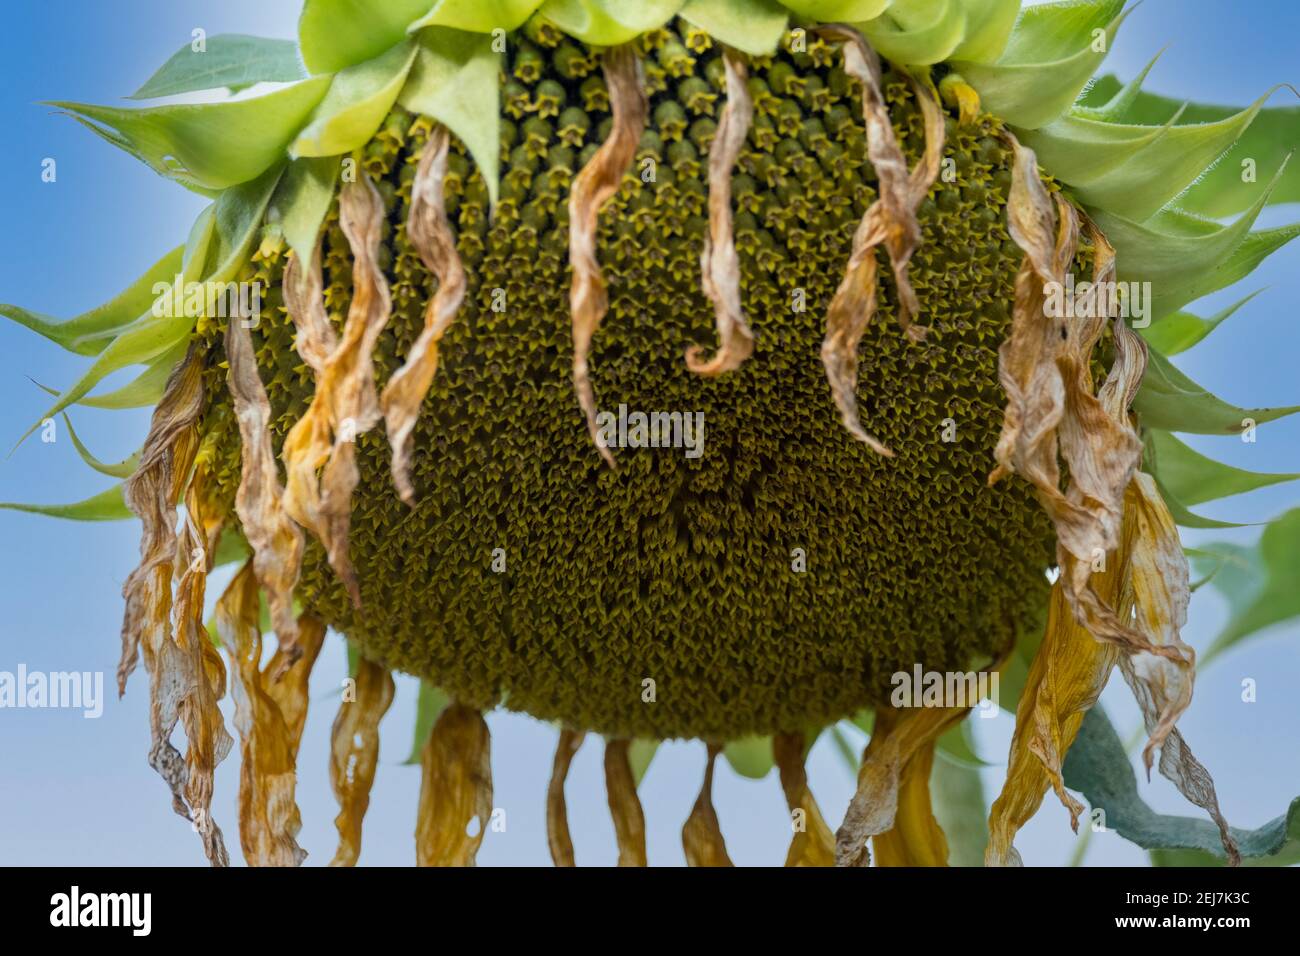 Large Wilting sunflower seedless drooping head in an Autumn blue sky after shedding all its seeds, Attica, Greece Stock Photo